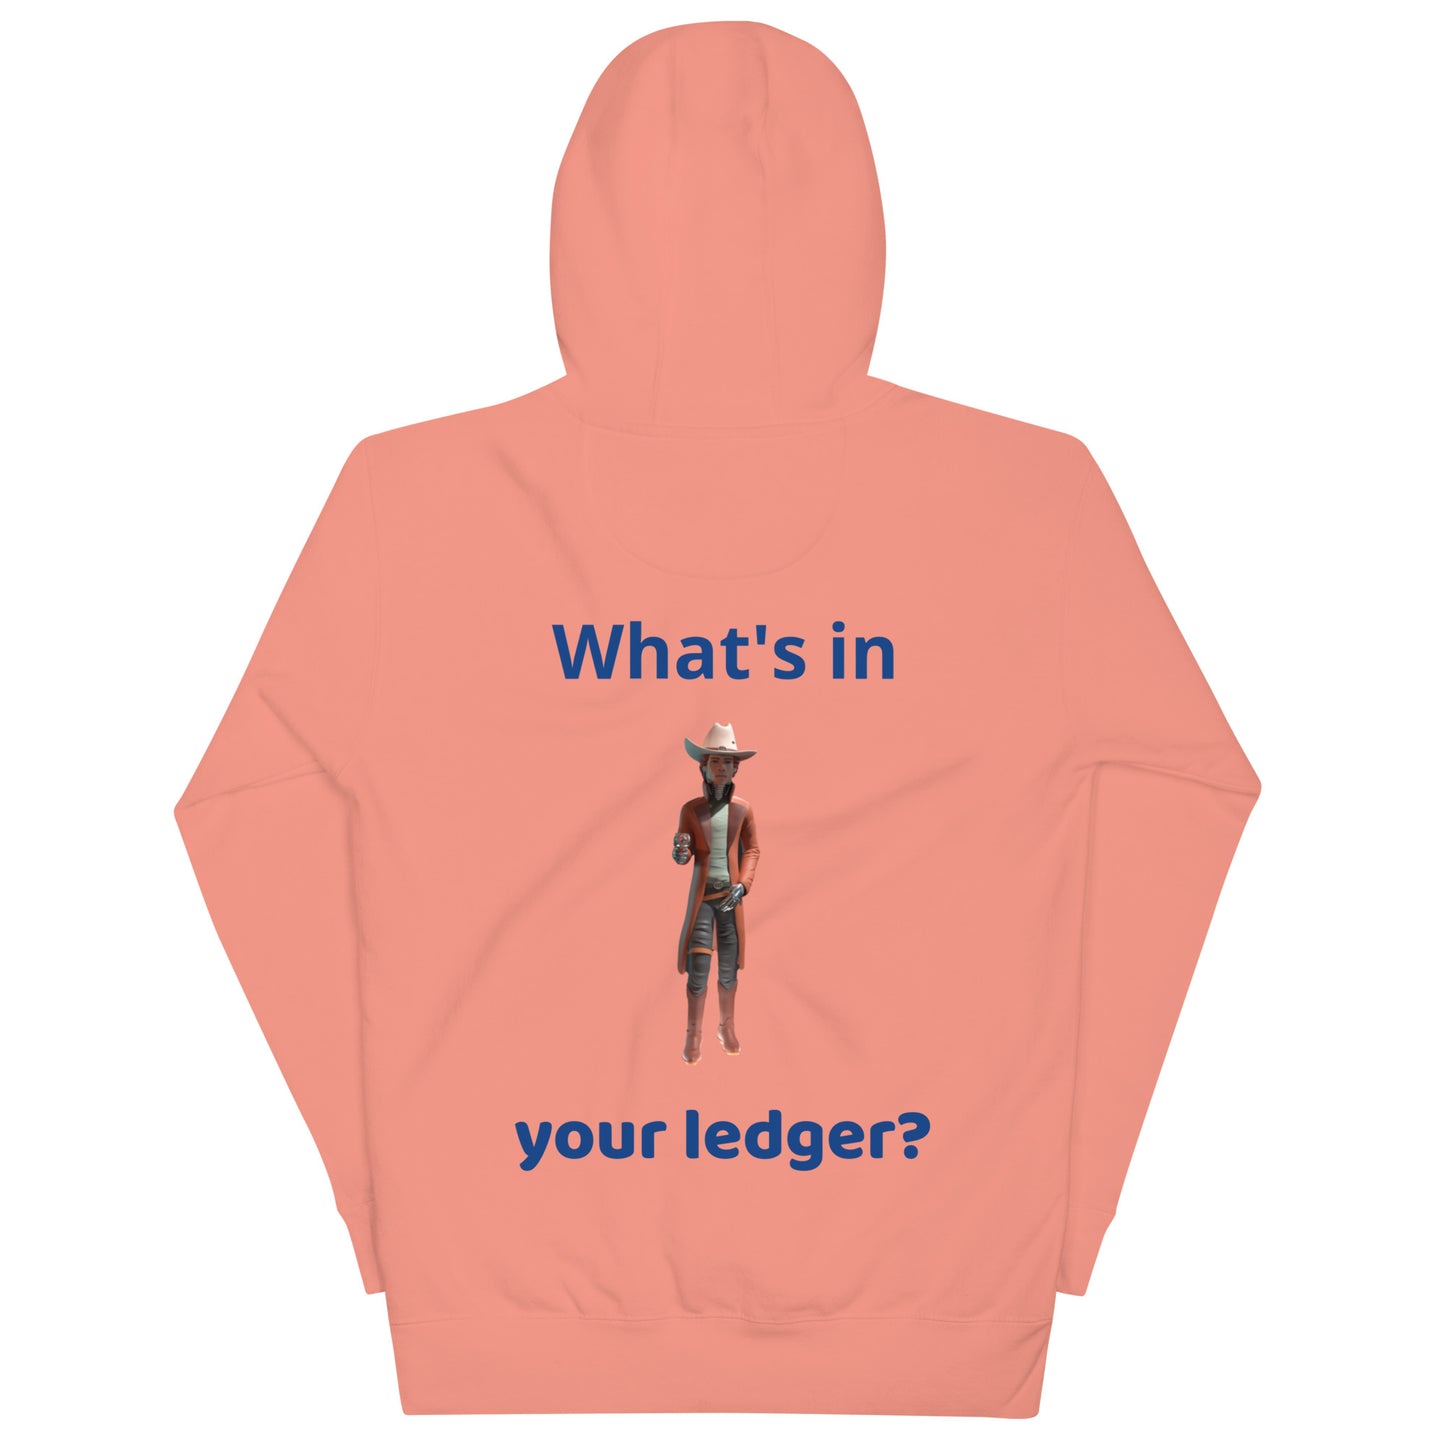 Zero-G “What’s in Your Ledger?” Unisex Hoodie